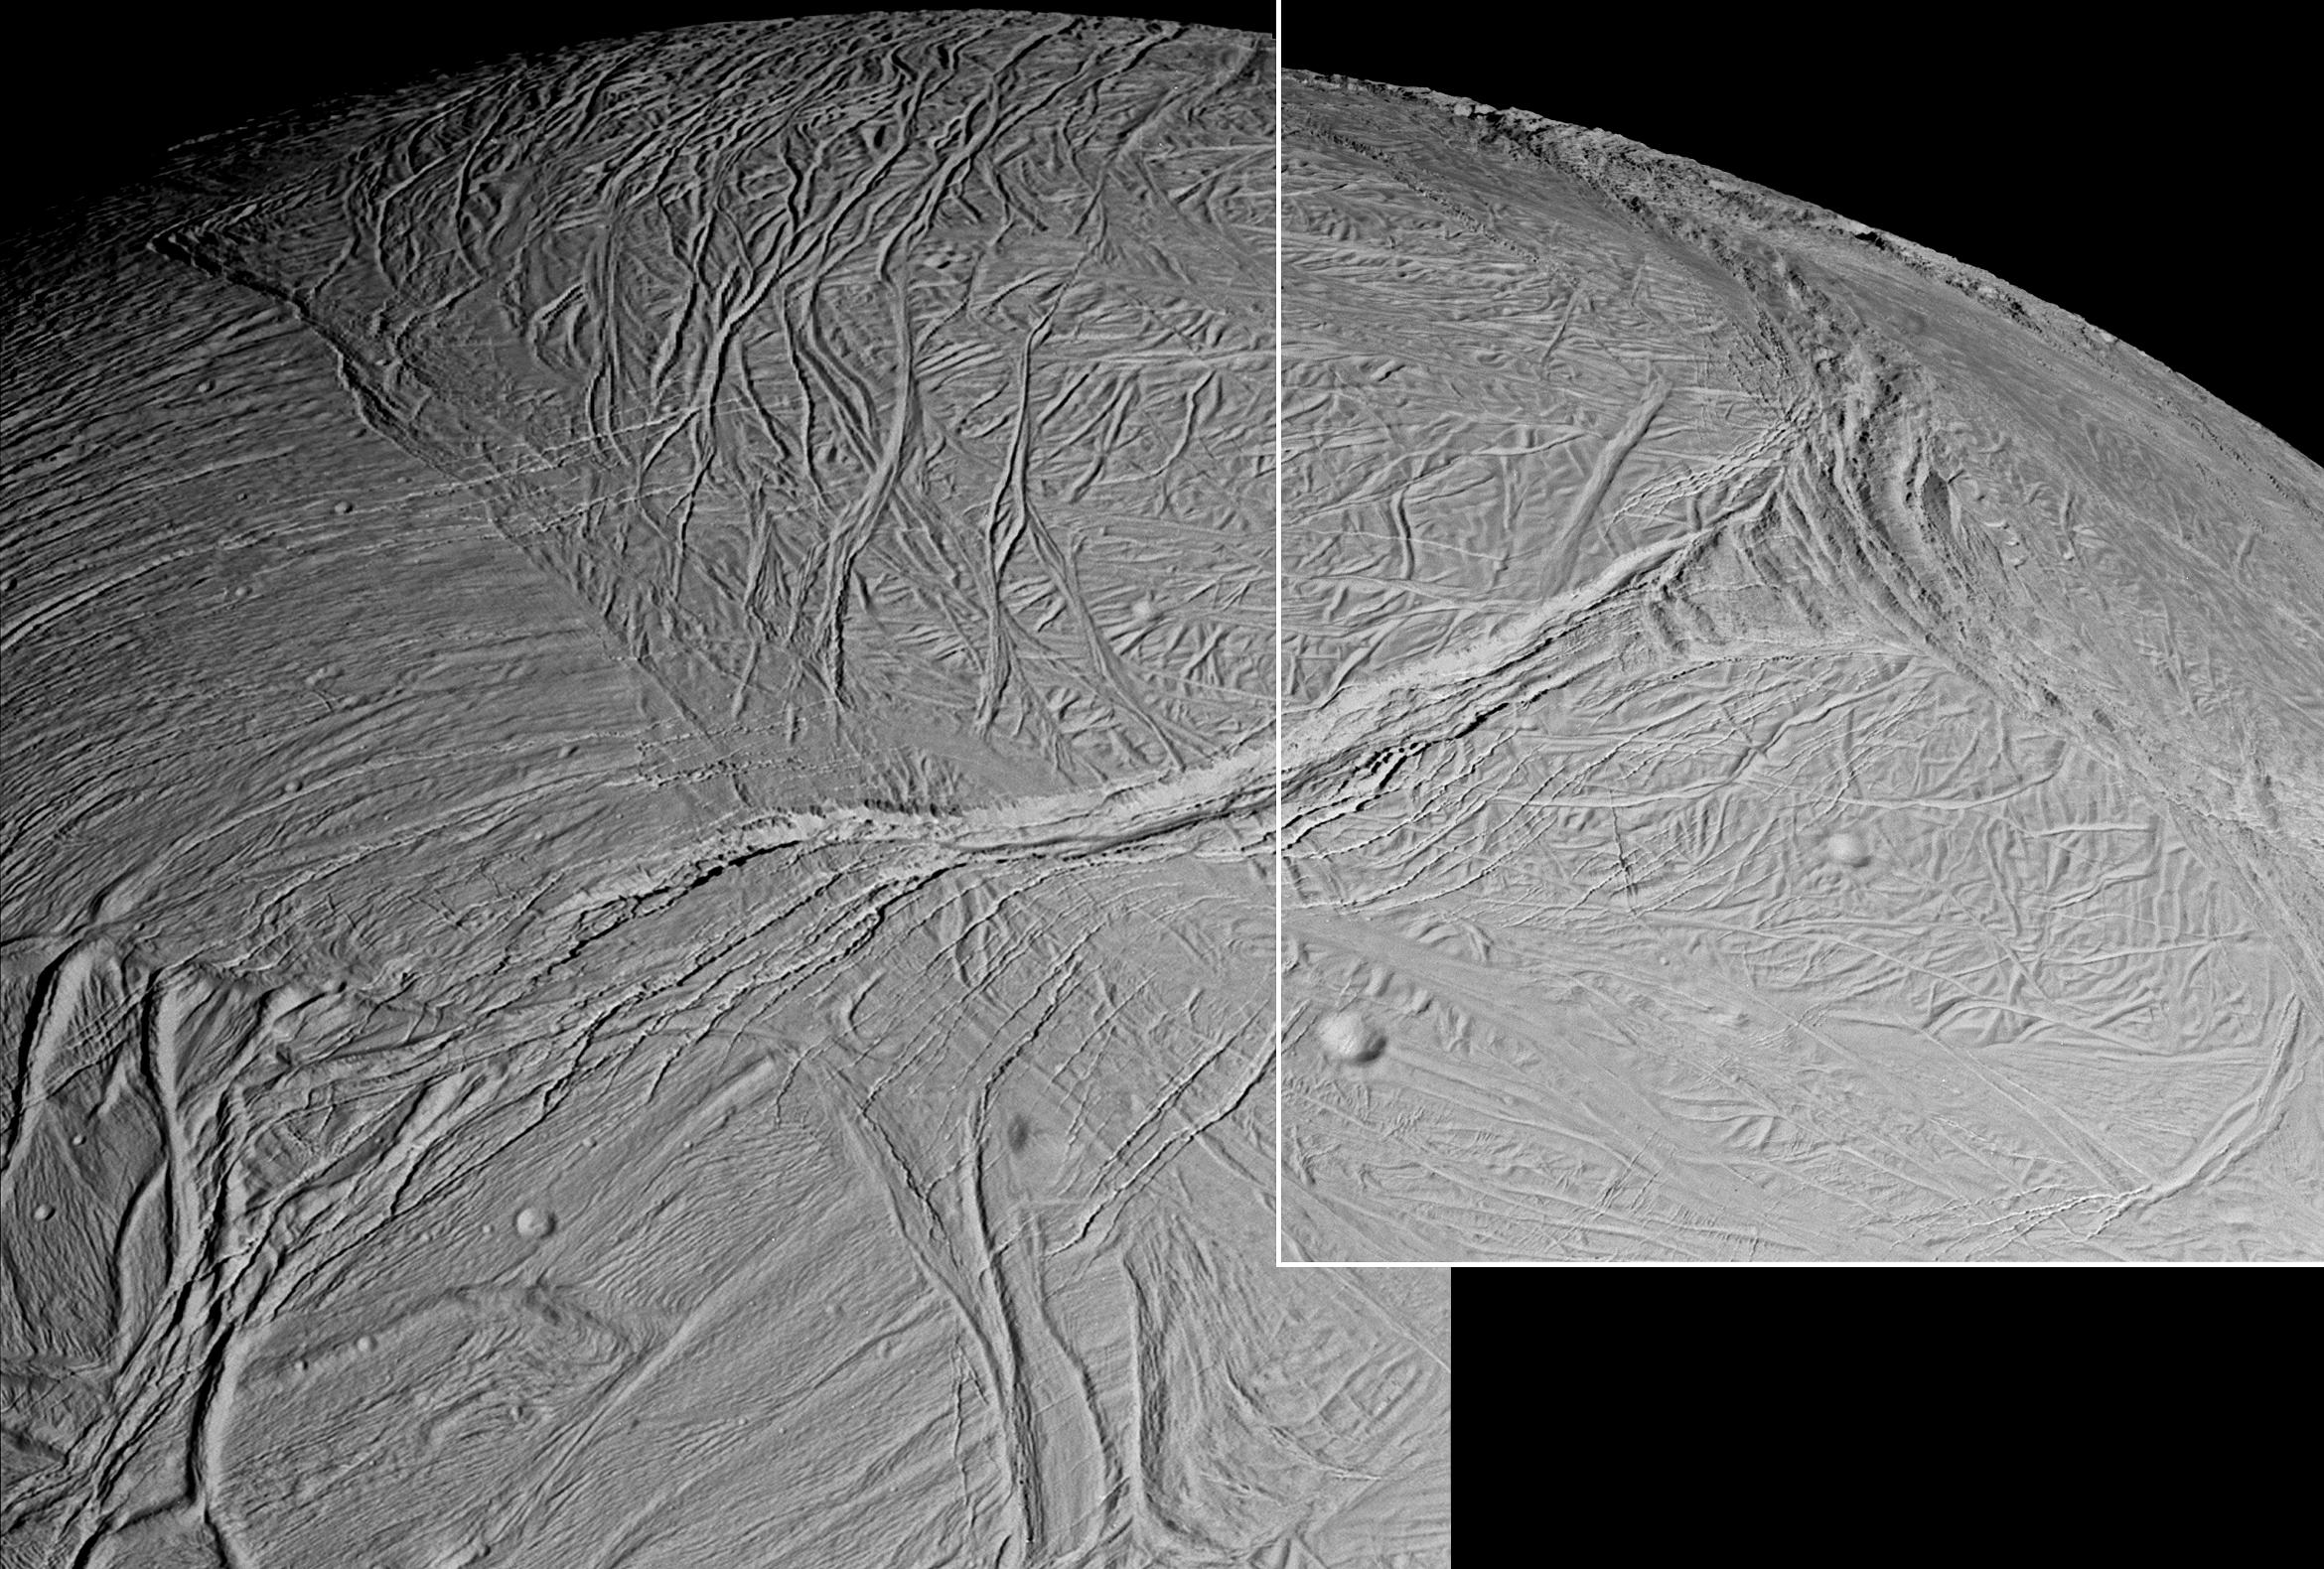 Enceladus' myriad of faults, fractures, folds, troughs and craters